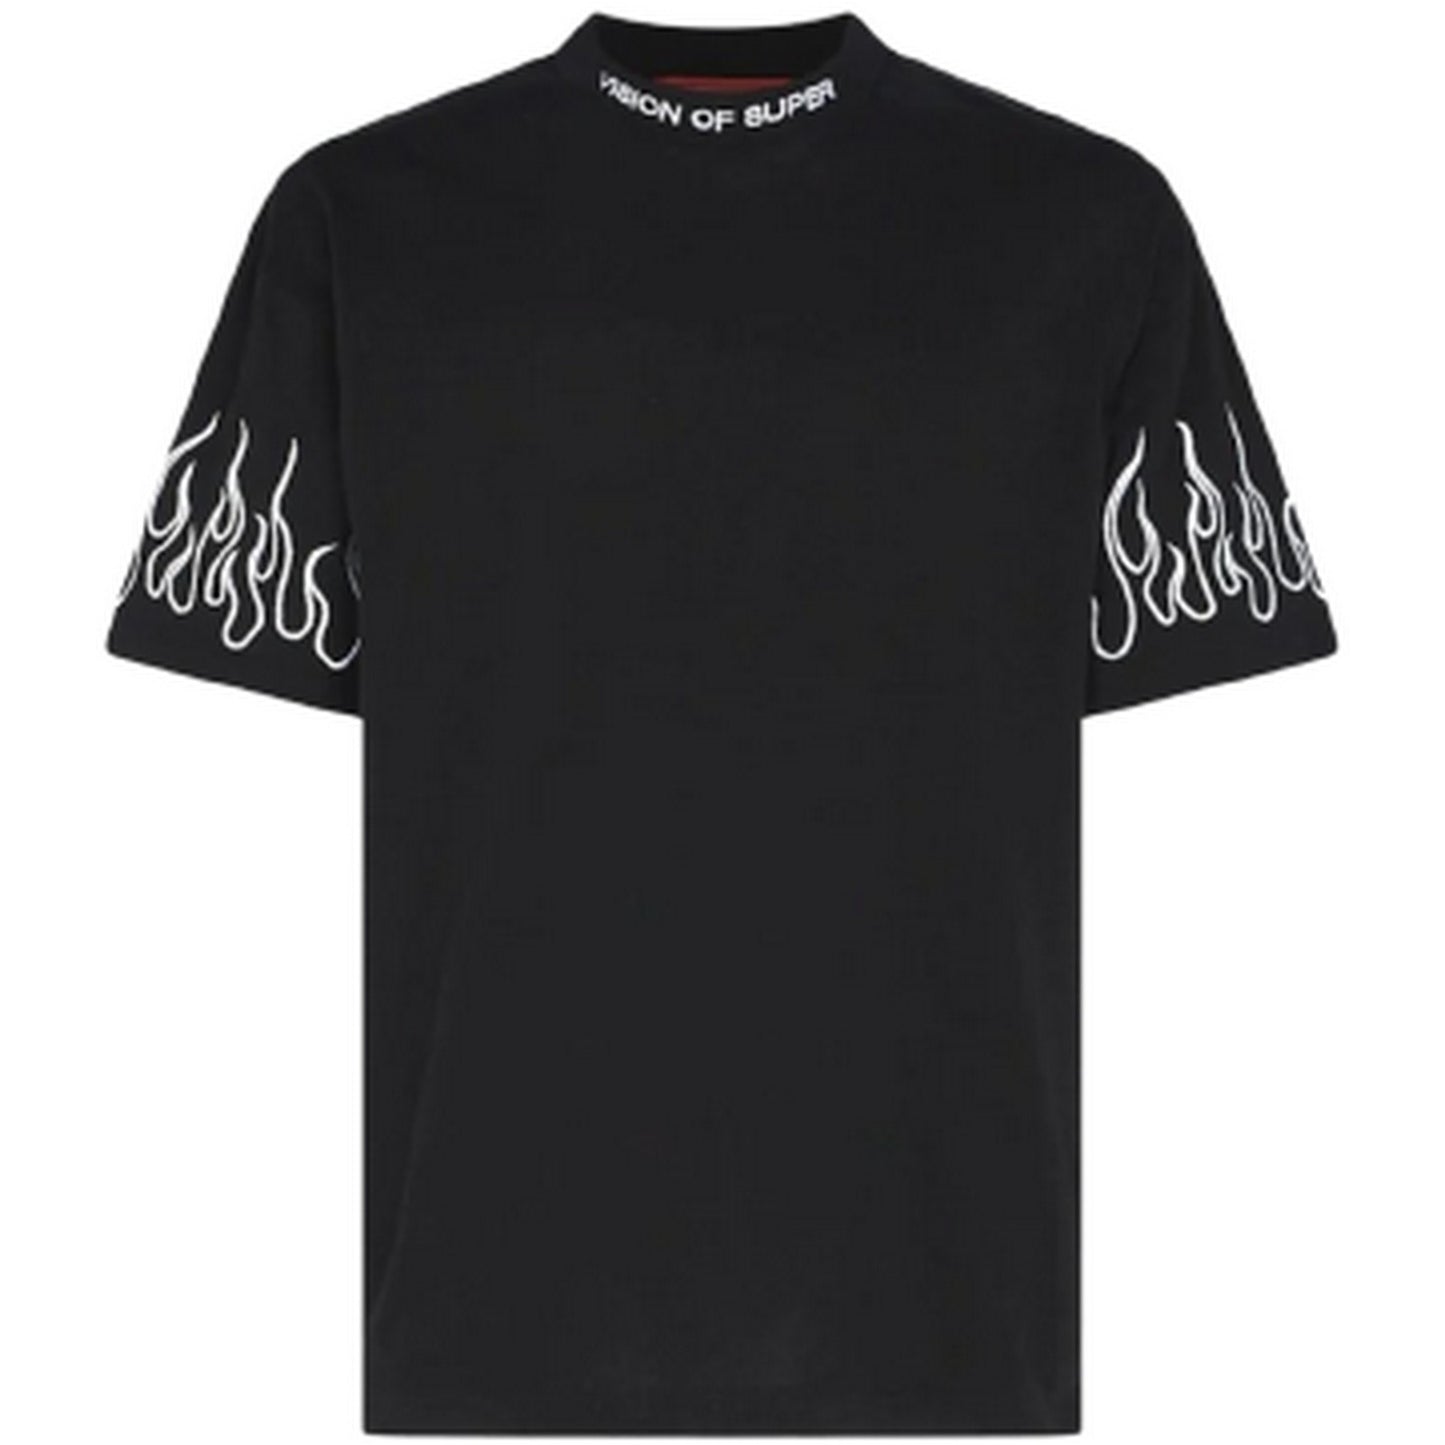 T-shirt Uomo Vision of Super - Black Tshirt With White Embroidered Flames - Nero